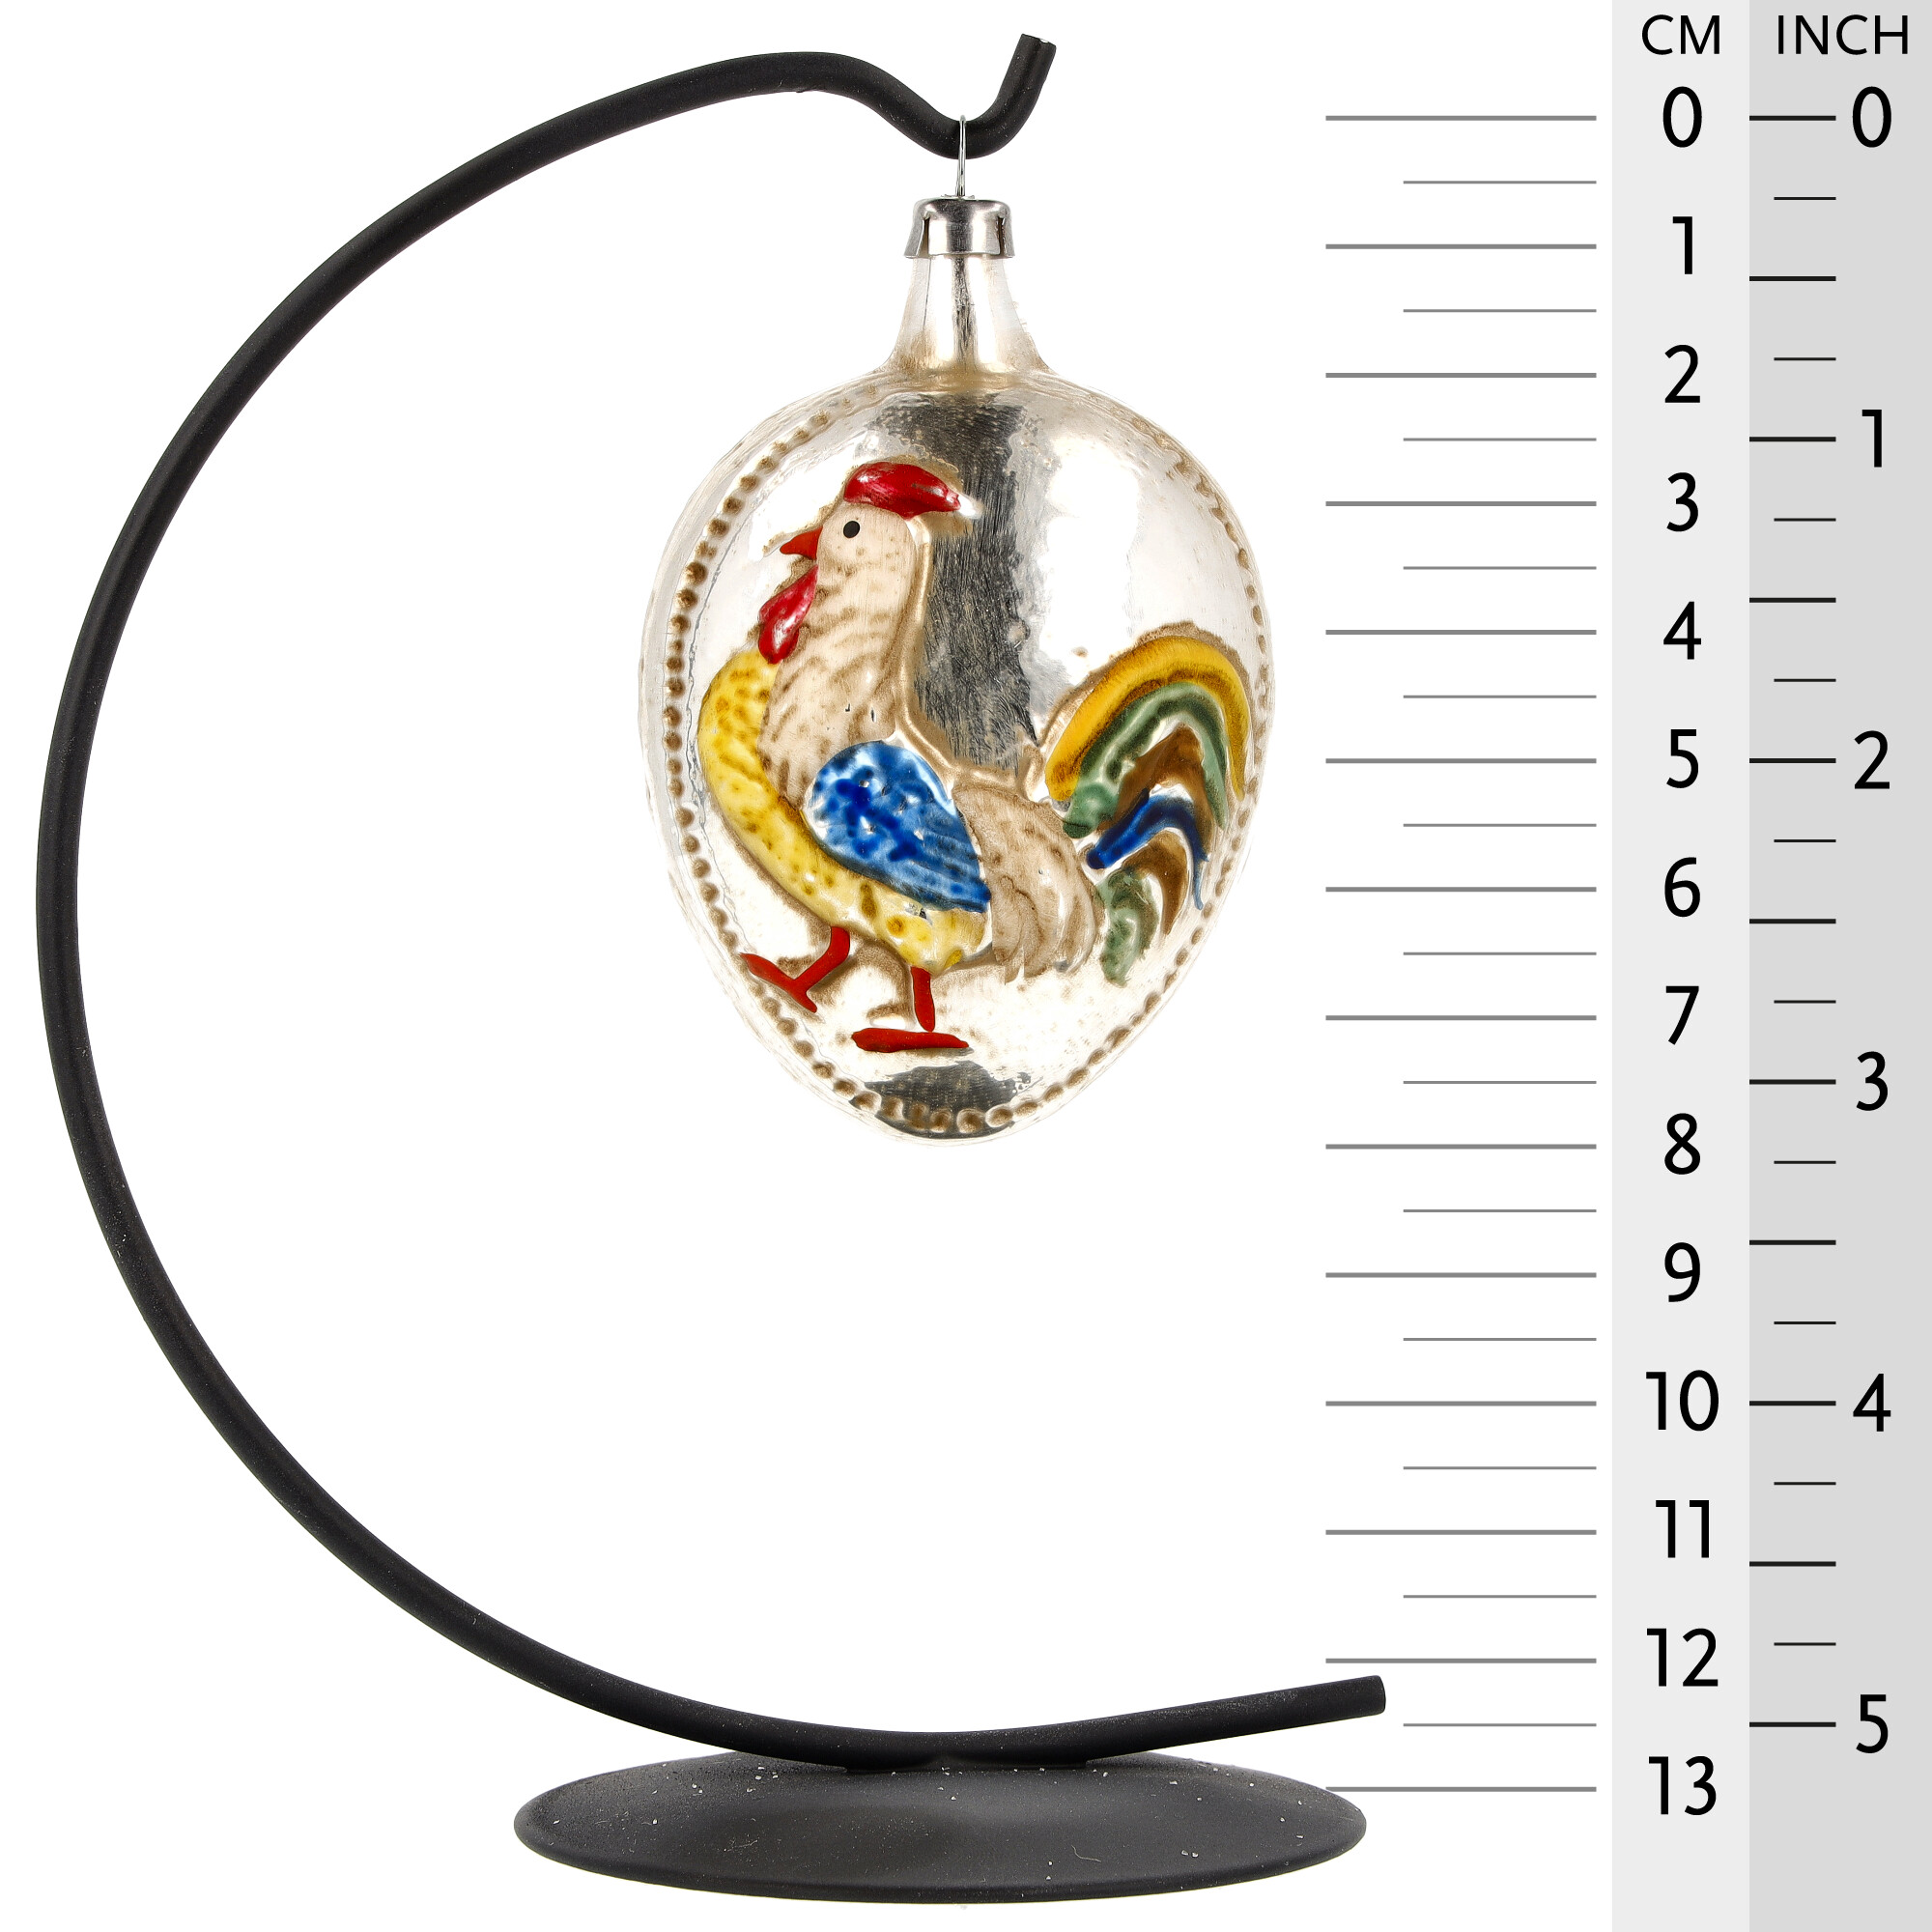 Retro Vintage style Christmas Glass Ornament - Egg with rooster